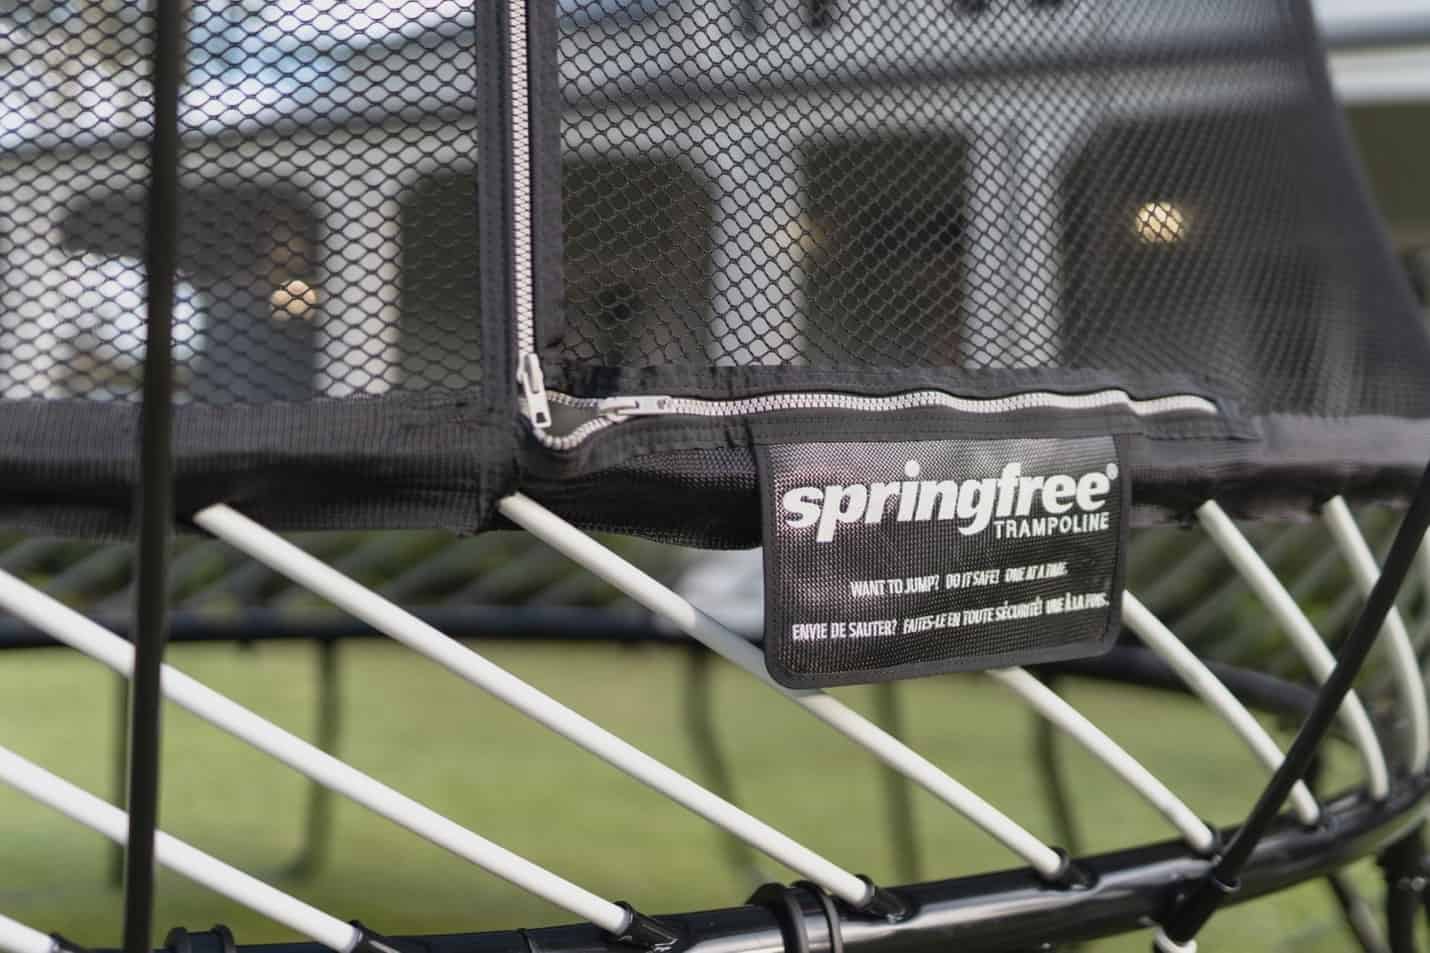 A close-up view of the Springfree Trampoline mat rods.